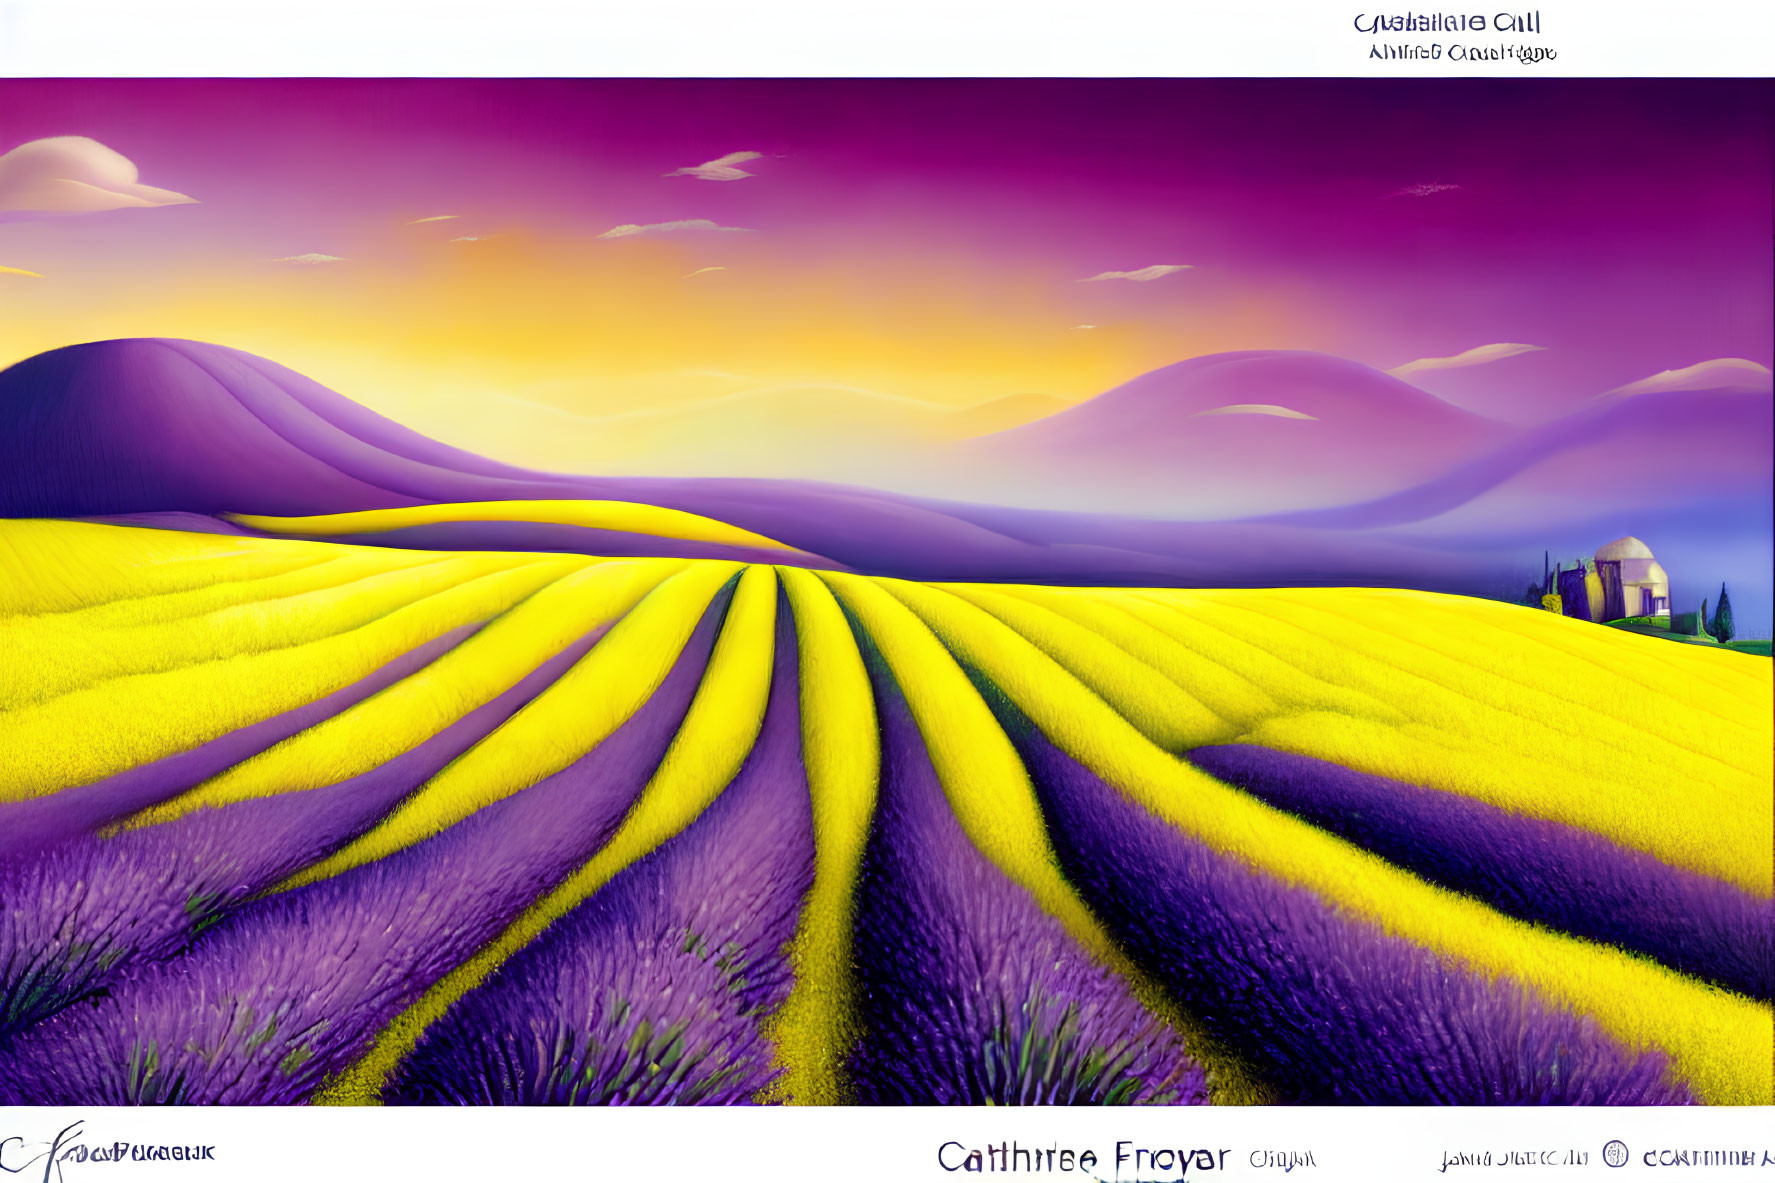 Lavender Fields Landscape Painting with Sunset Sky and Surreal Hills